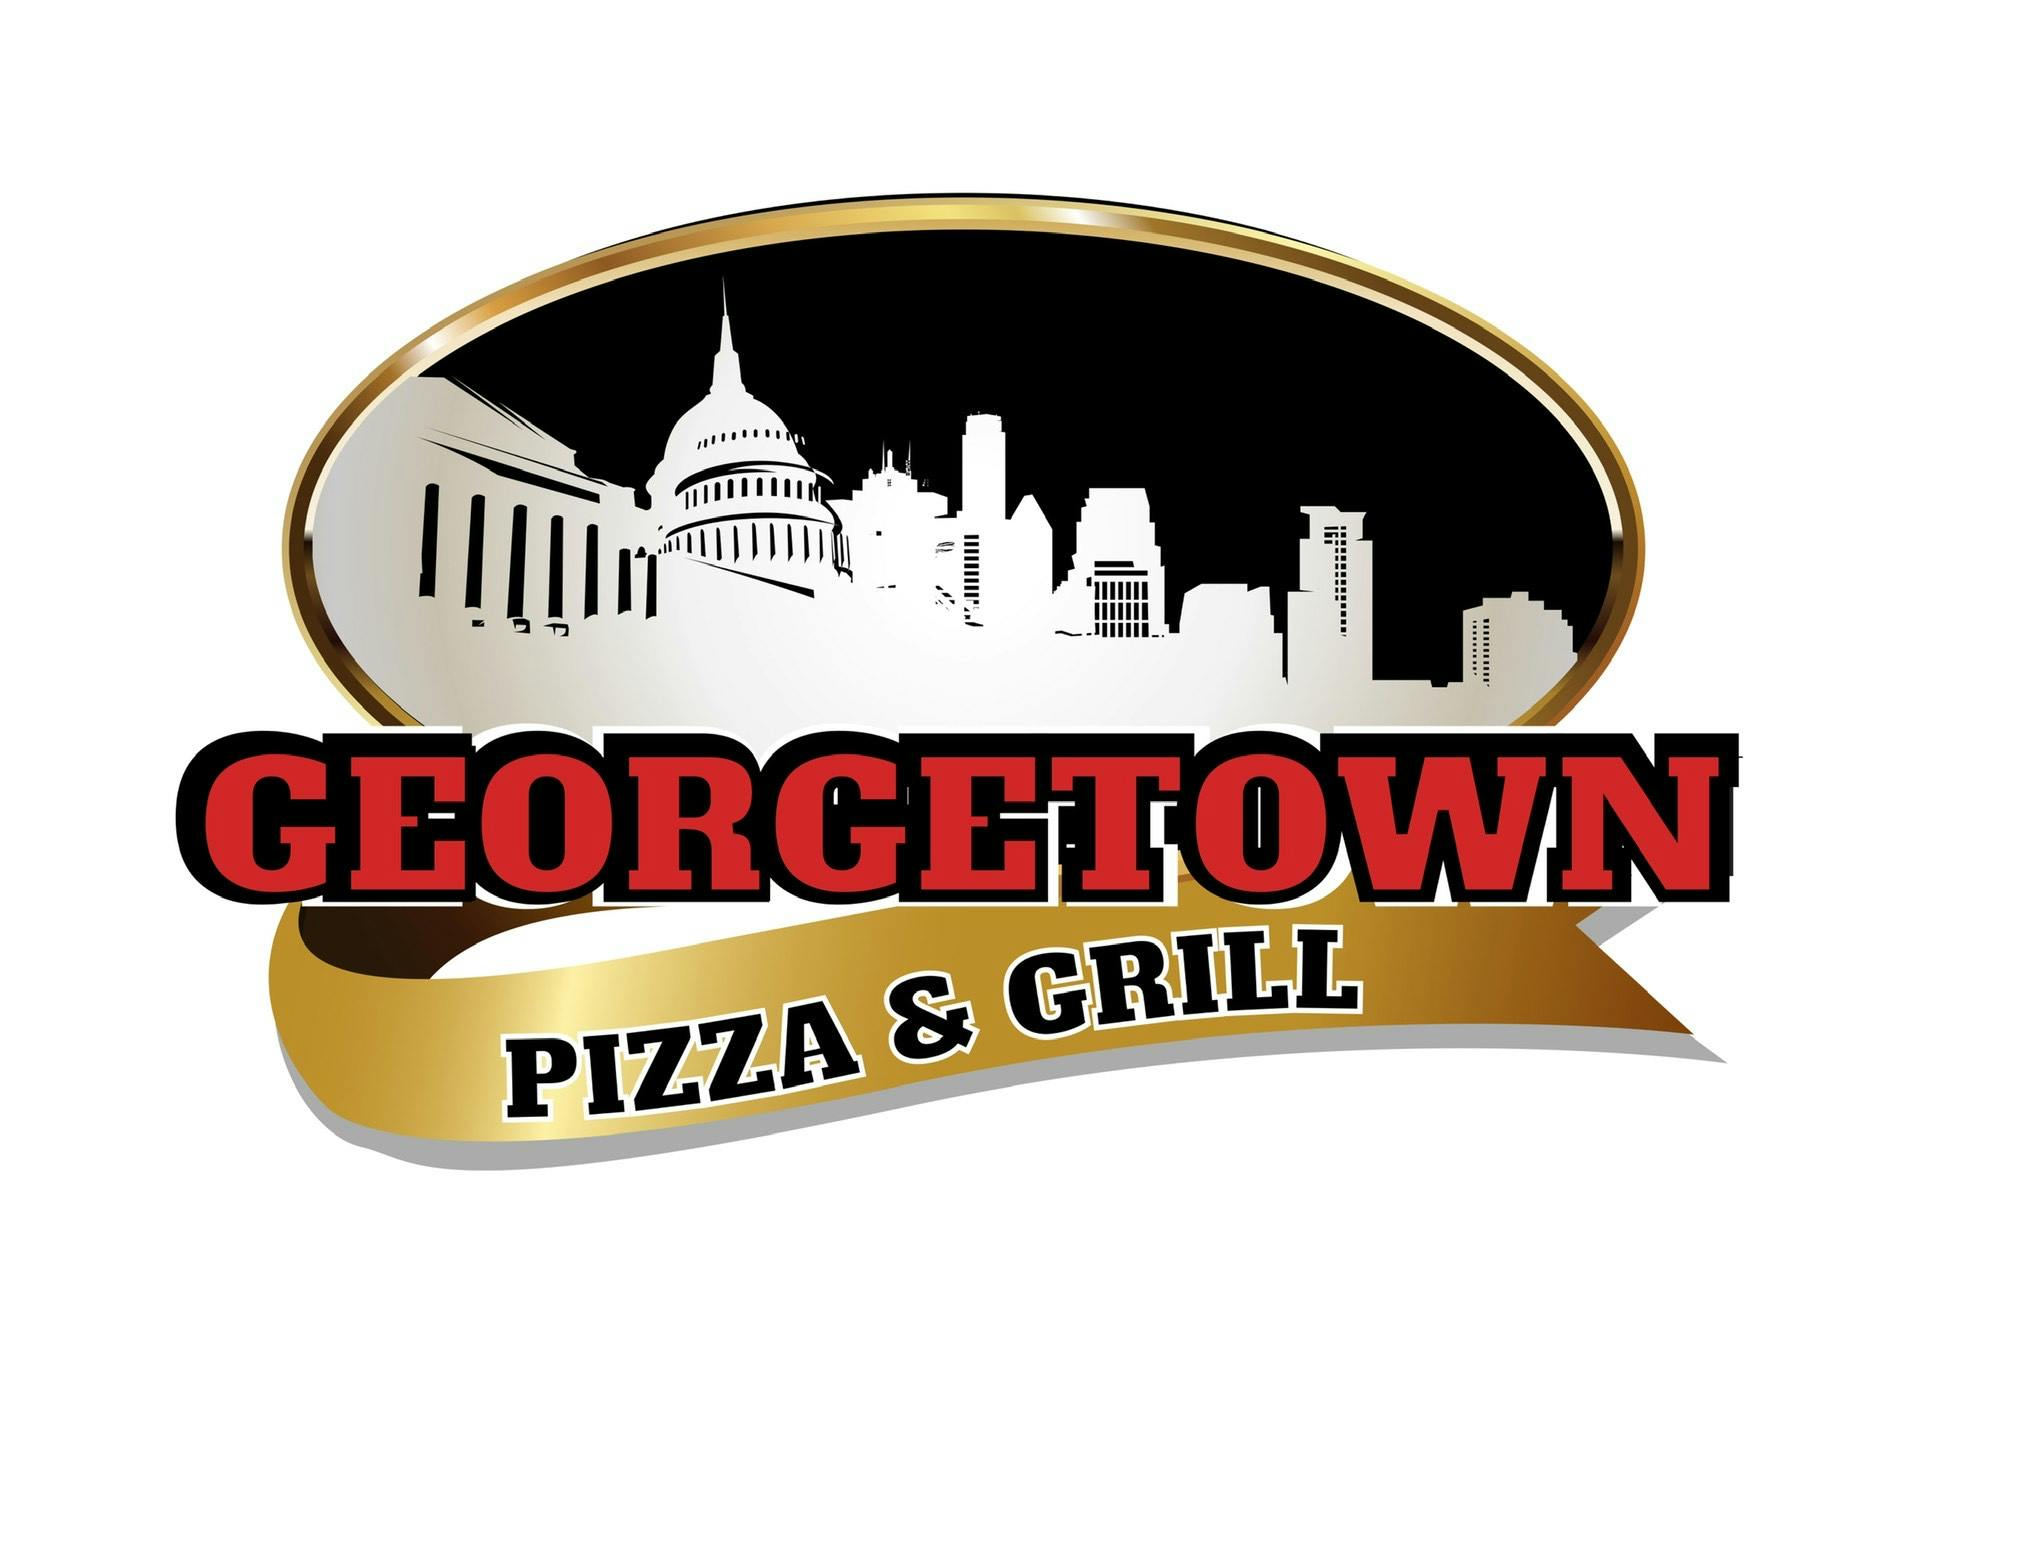 Georgetown Pizza & Grill